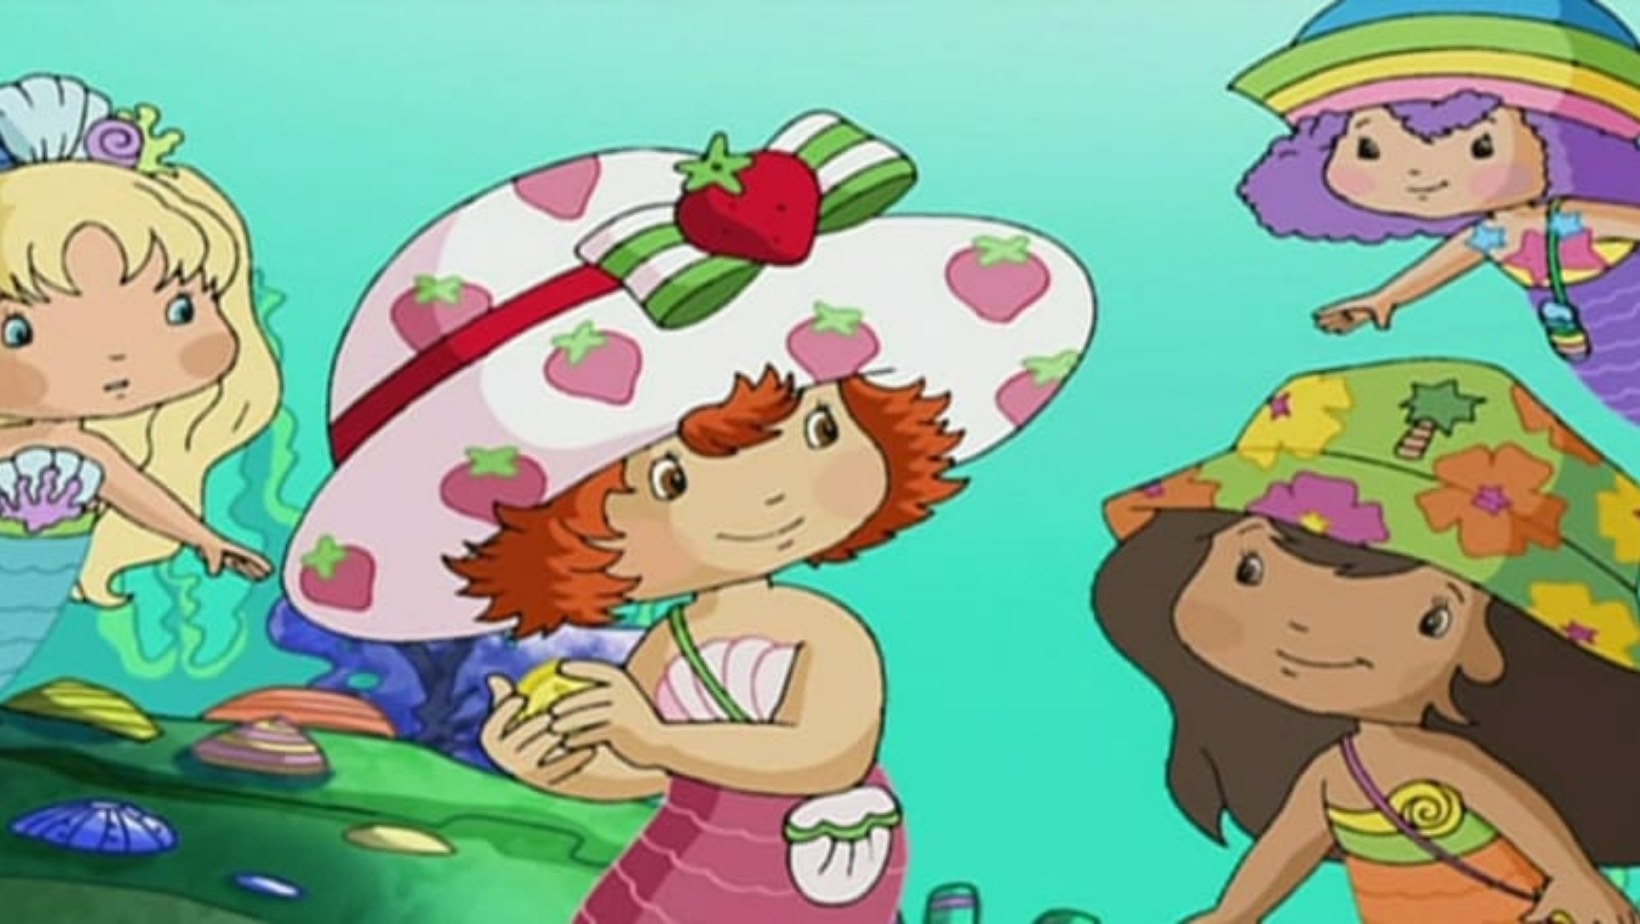 Strawberry Shortcake and her friends as mermaids